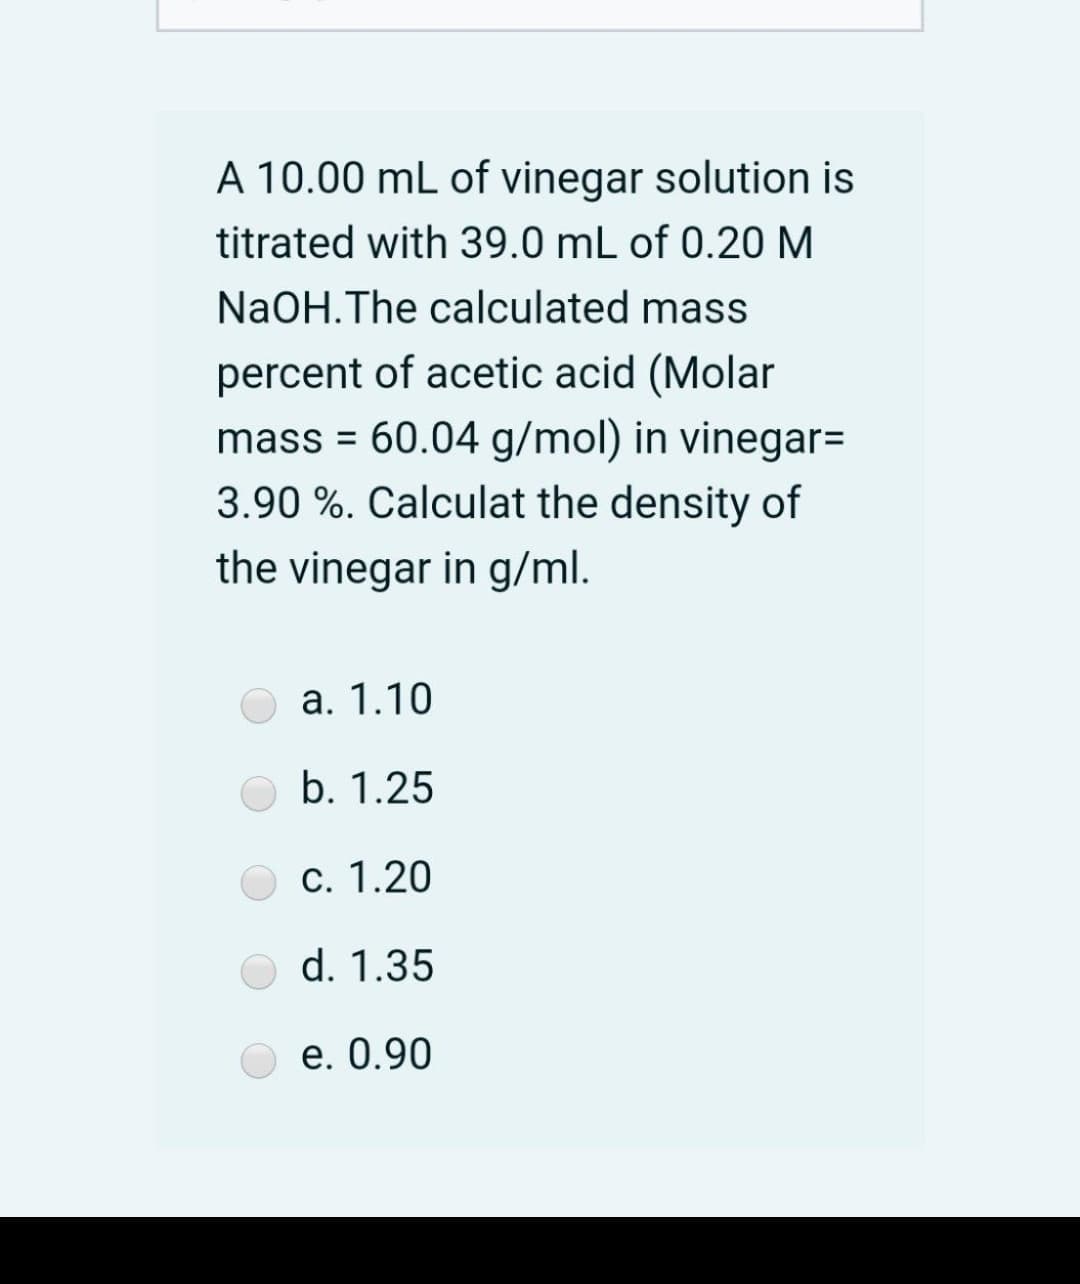 A 10.00 mL of vinegar solution is
titrated with 39.0 mL of 0.20 M
NaOH.The calculated mass
percent of acetic acid (Molar
mass = 60.04 g/mol) in vinegar=
3.90 %. Calculat the density of
the vinegar in g/ml.
а. 1.10
b. 1.25
c. 1.20
d. 1.35
е. 0.90
